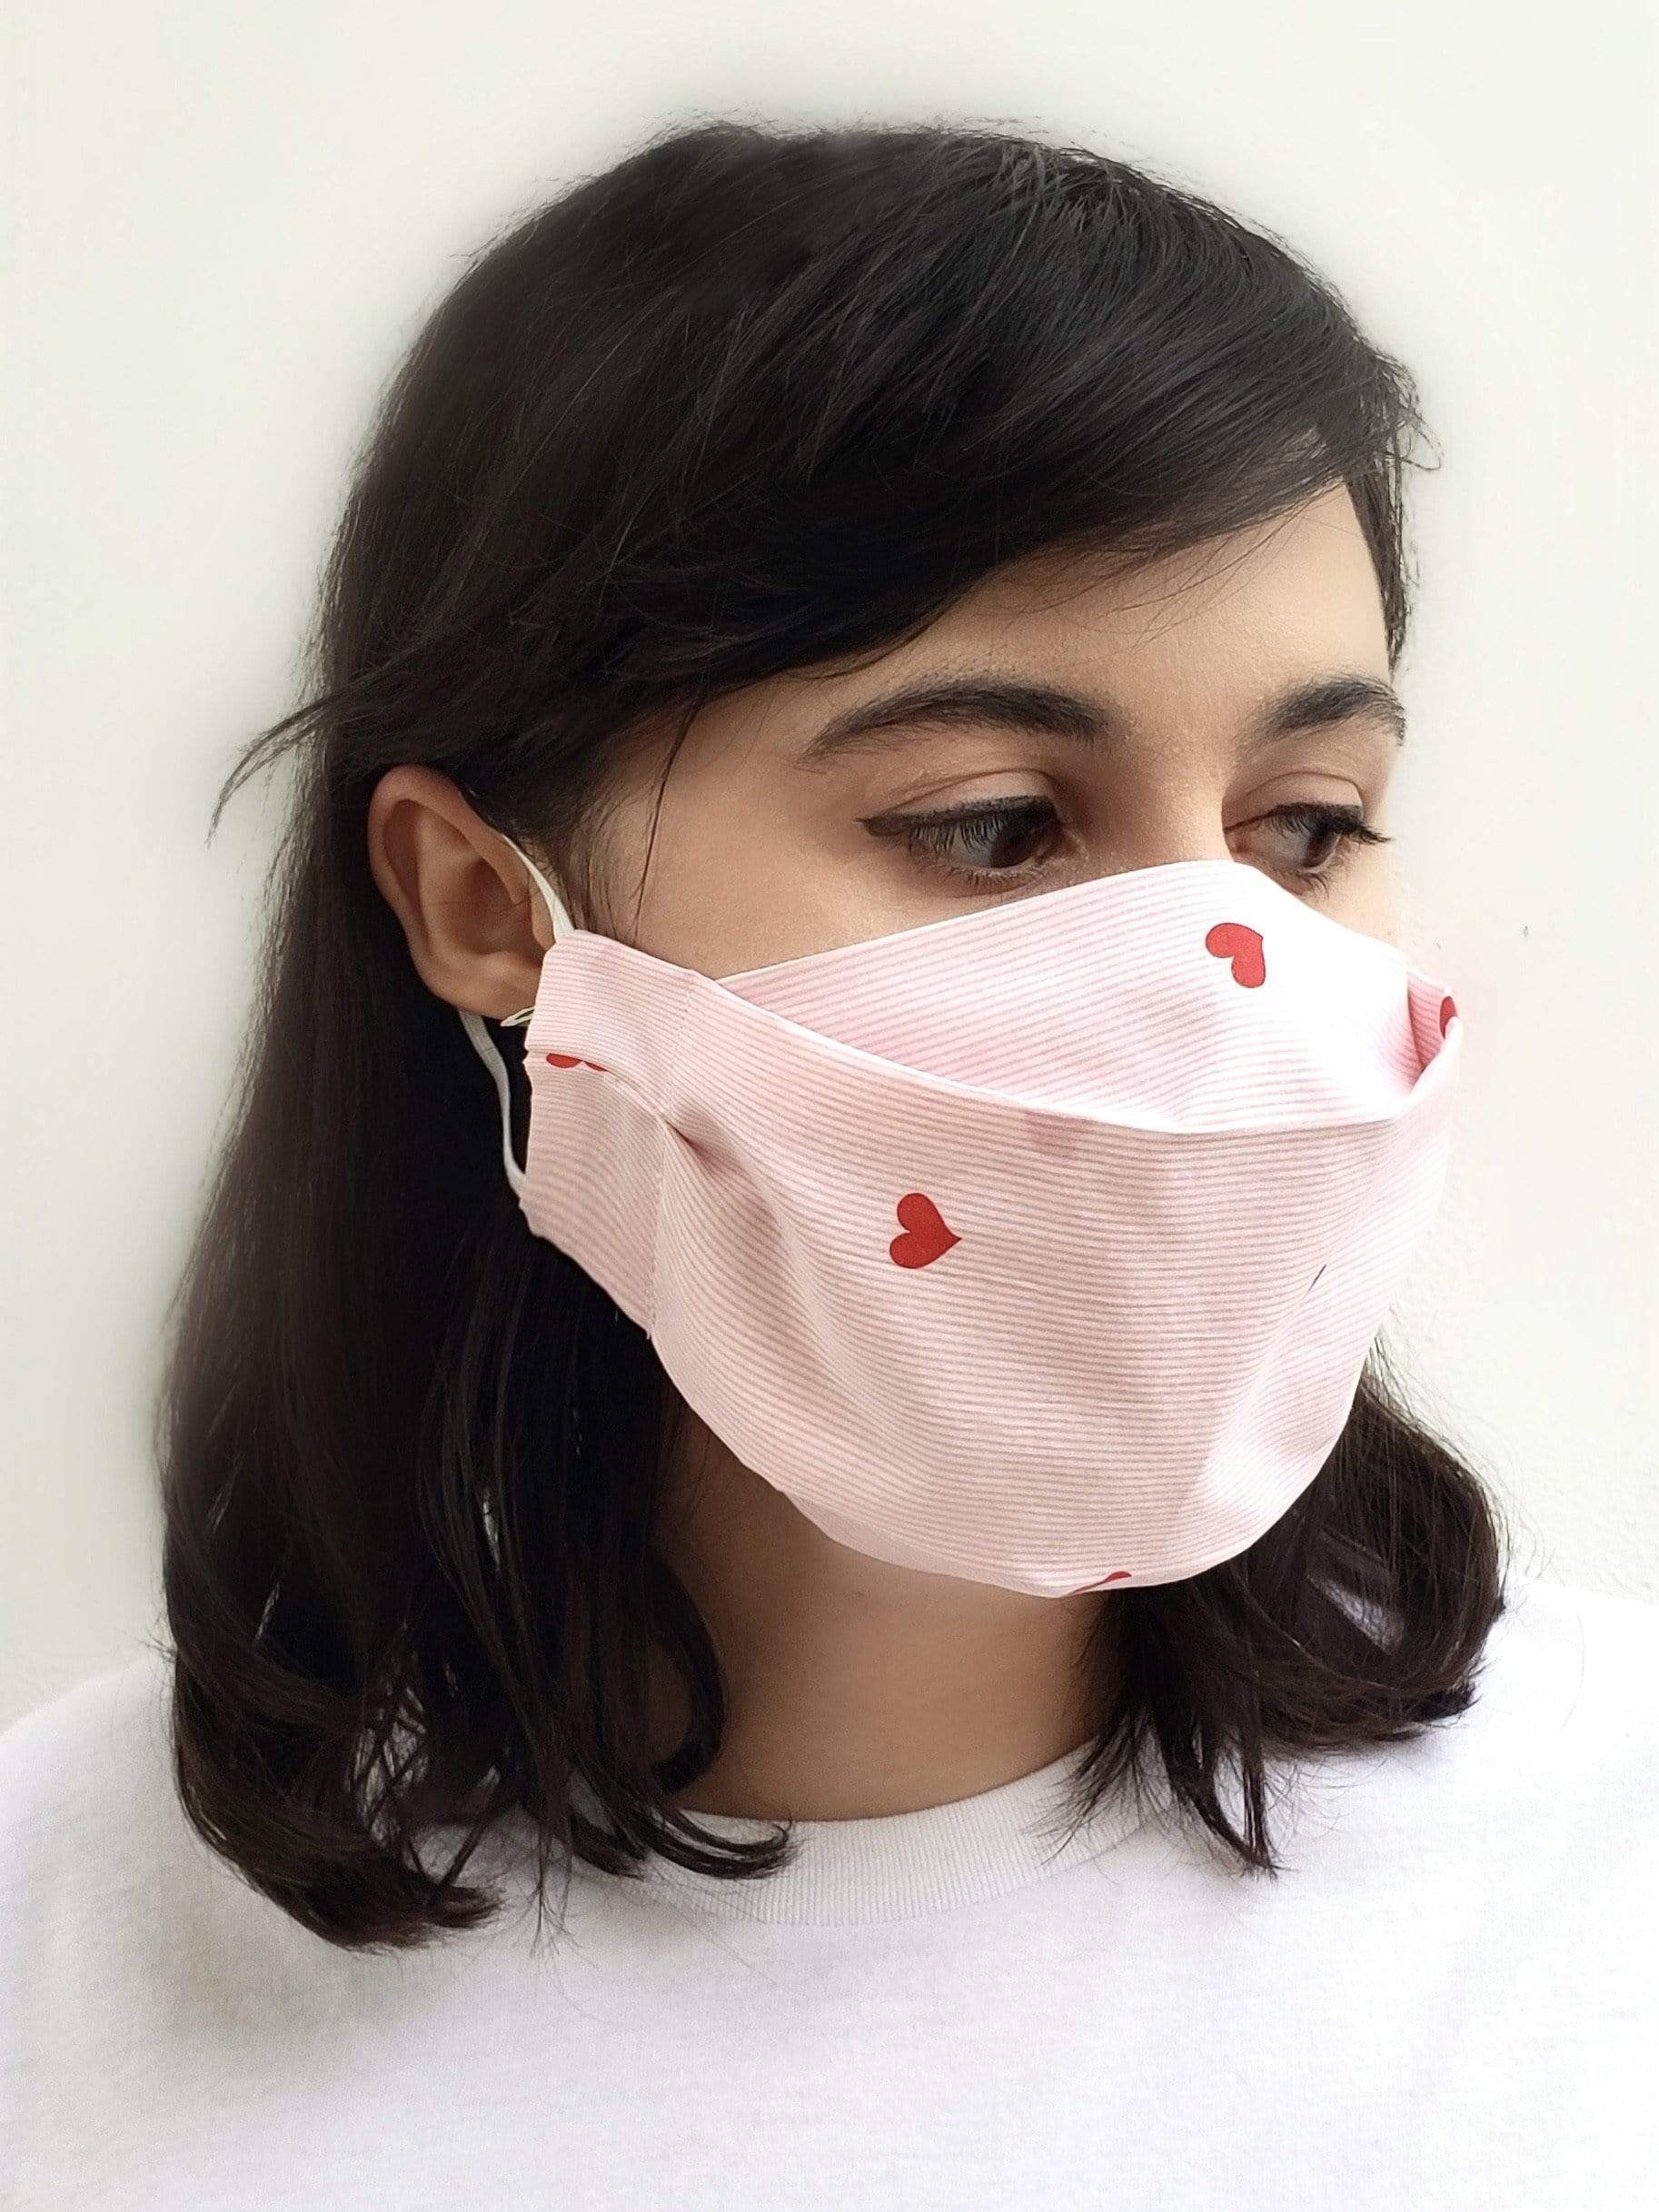 Box Pleated Face Masks True White Cotton (Box Pleated Mask with Filter Pocket) XS/S (CHILD AGE 4-12) - Chloe Dao